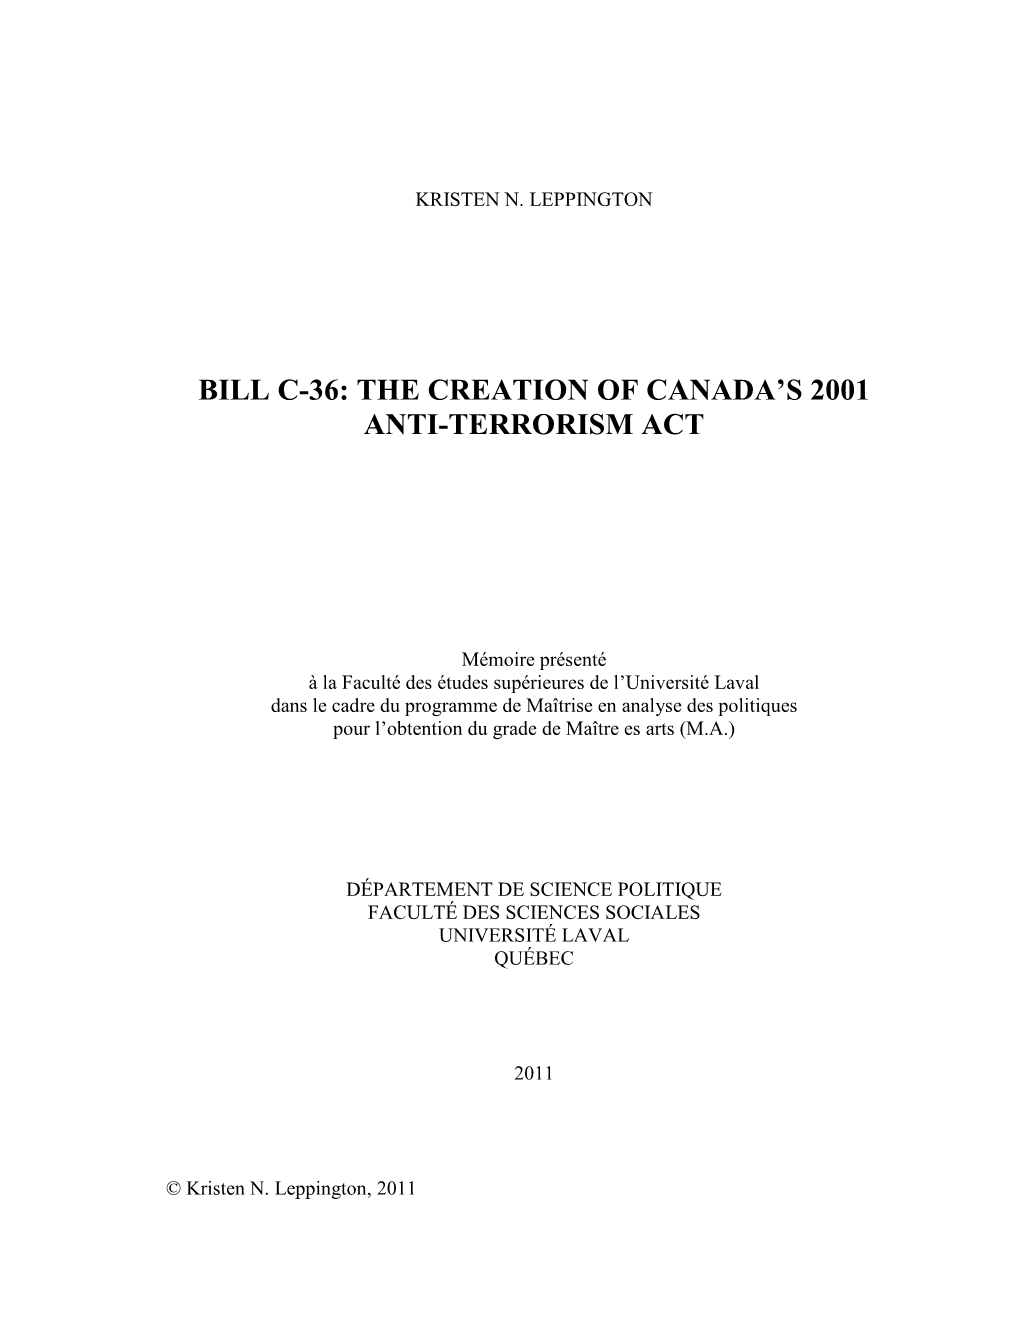 Bill C-36: the Creation of Canada’S 2001 Anti-Terrorism Act